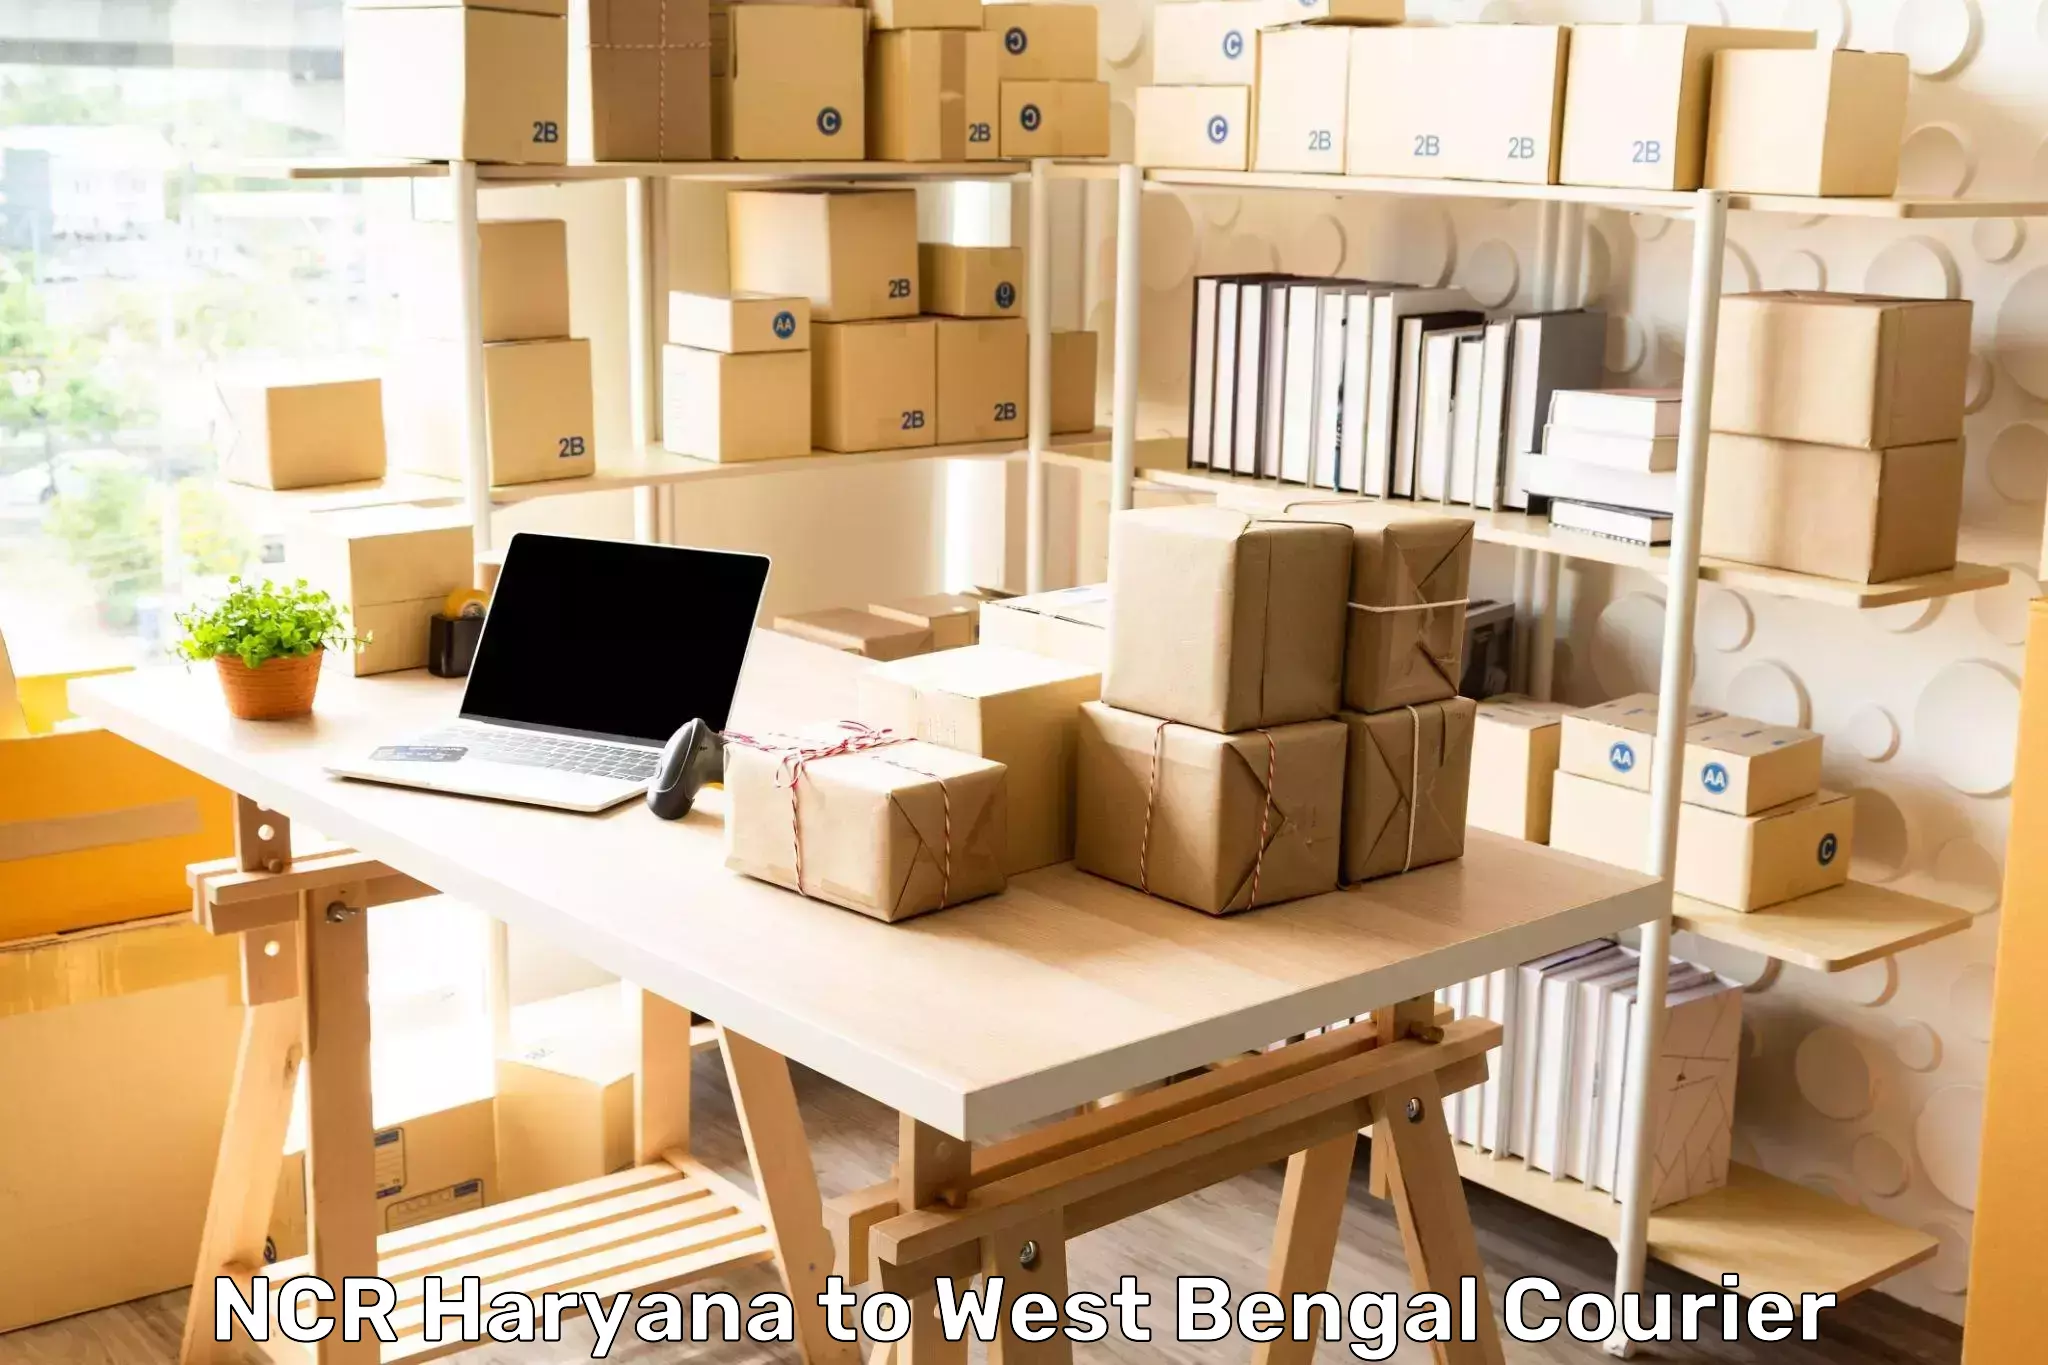 Package delivery network NCR Haryana to Kharagpur